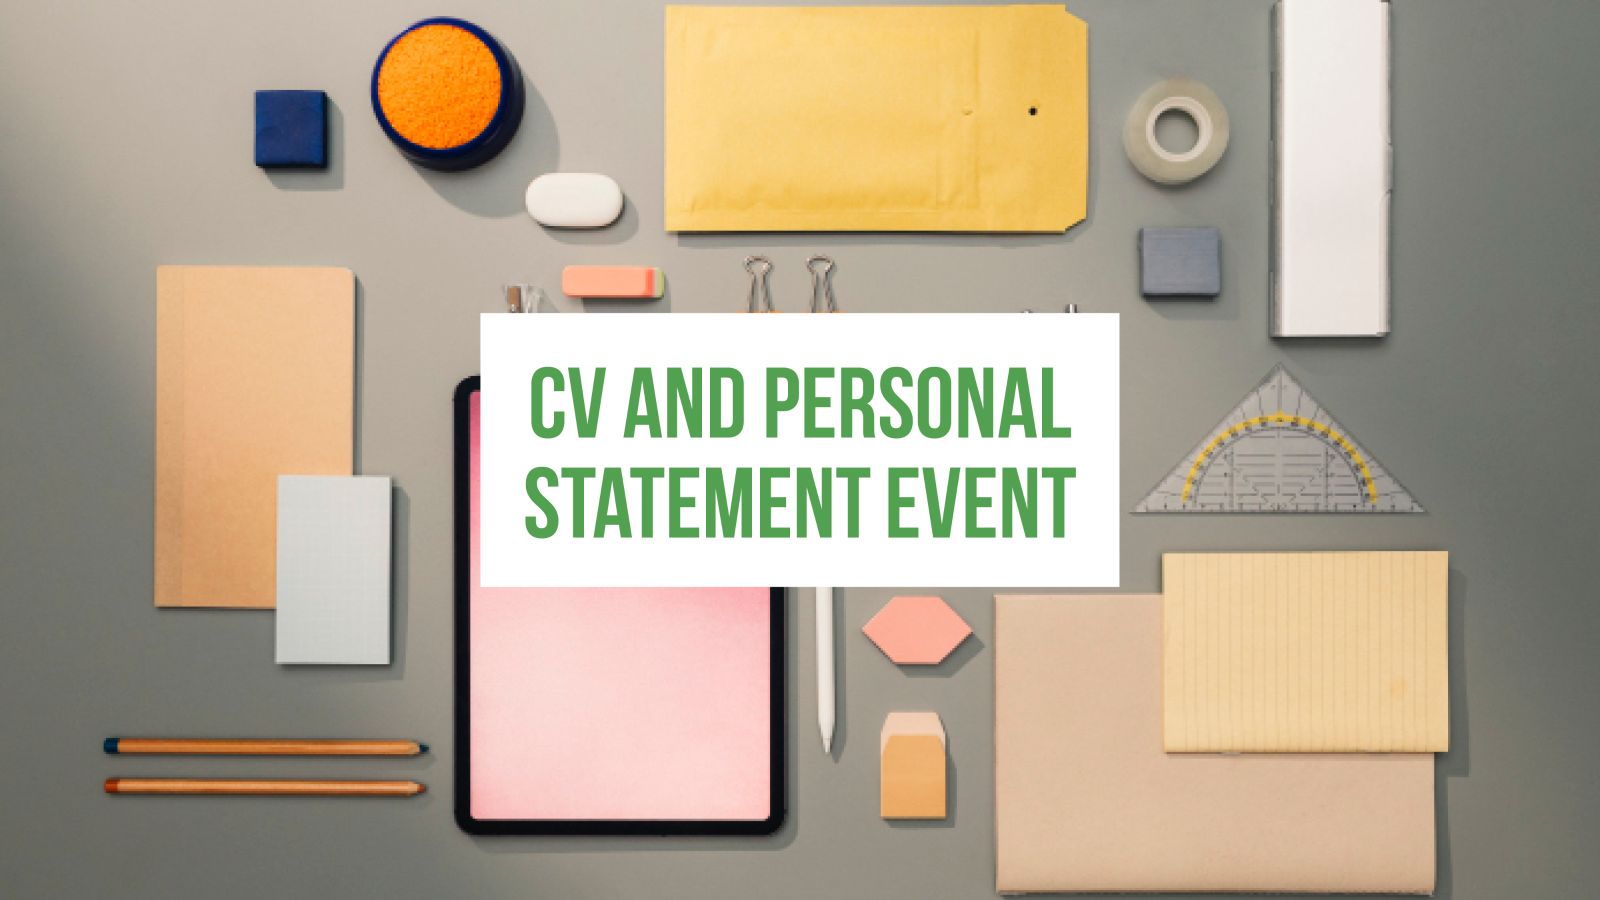 Event Banner that include the event title: CV and Personal Statements for Further Education